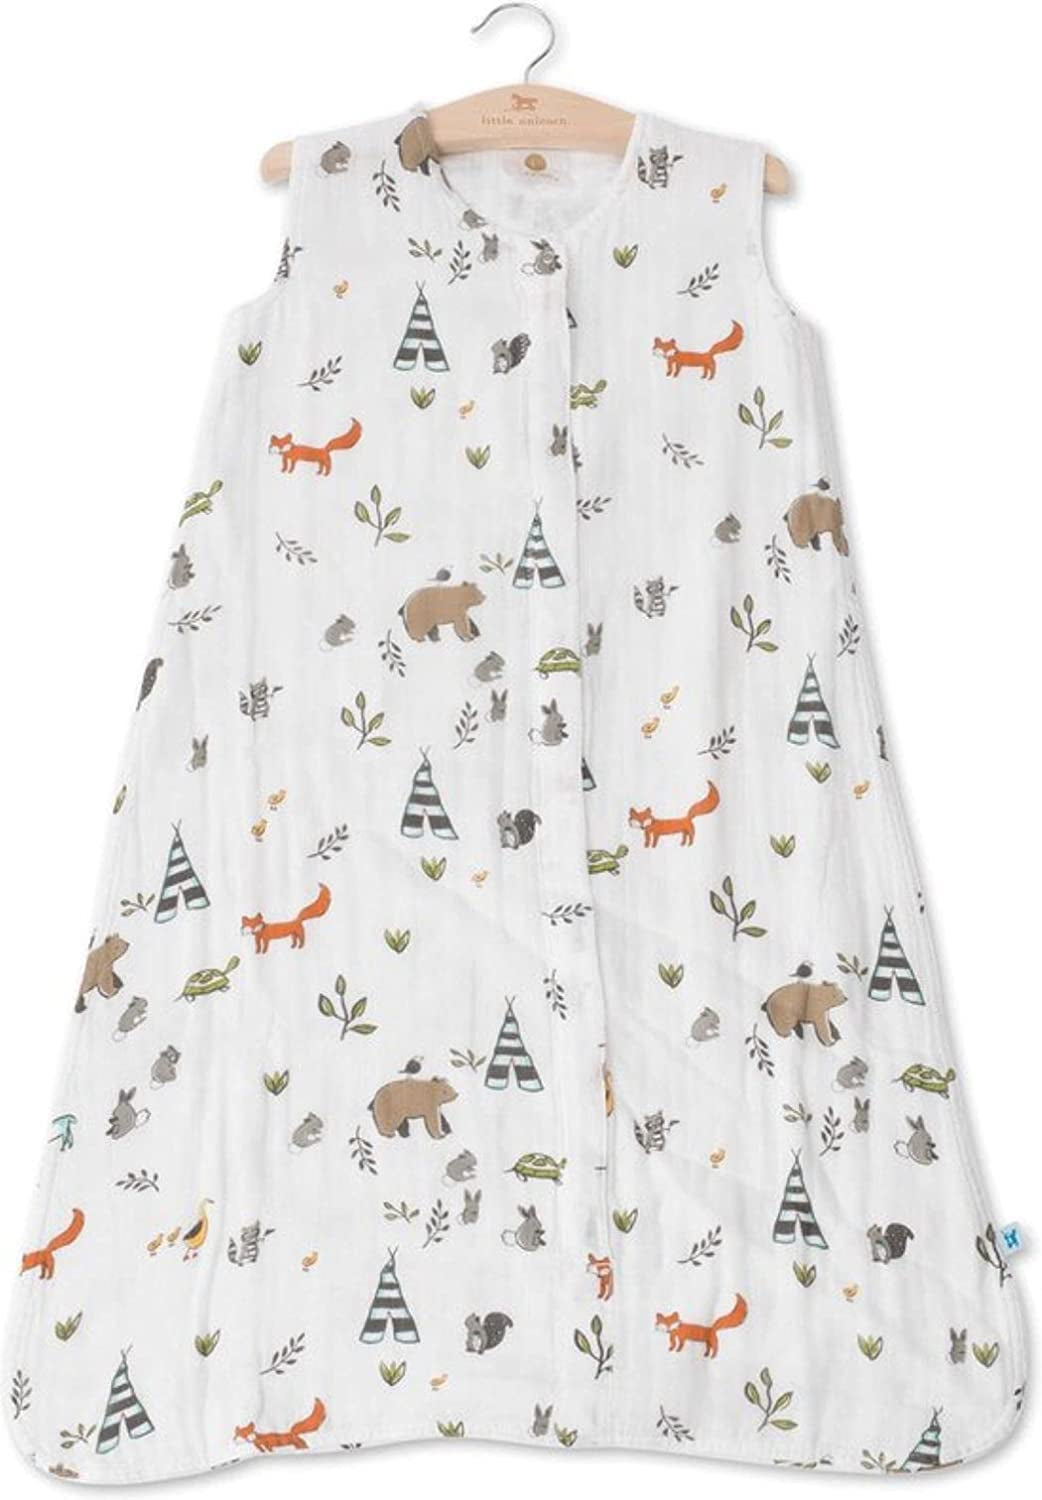 – Forest Friends Cotton Muslin Sleep Bag | 100% Cotton | Super Soft and Lightweight | Baby | Size Large: 12-18 Months | Machine Washable | 1.1 TOG